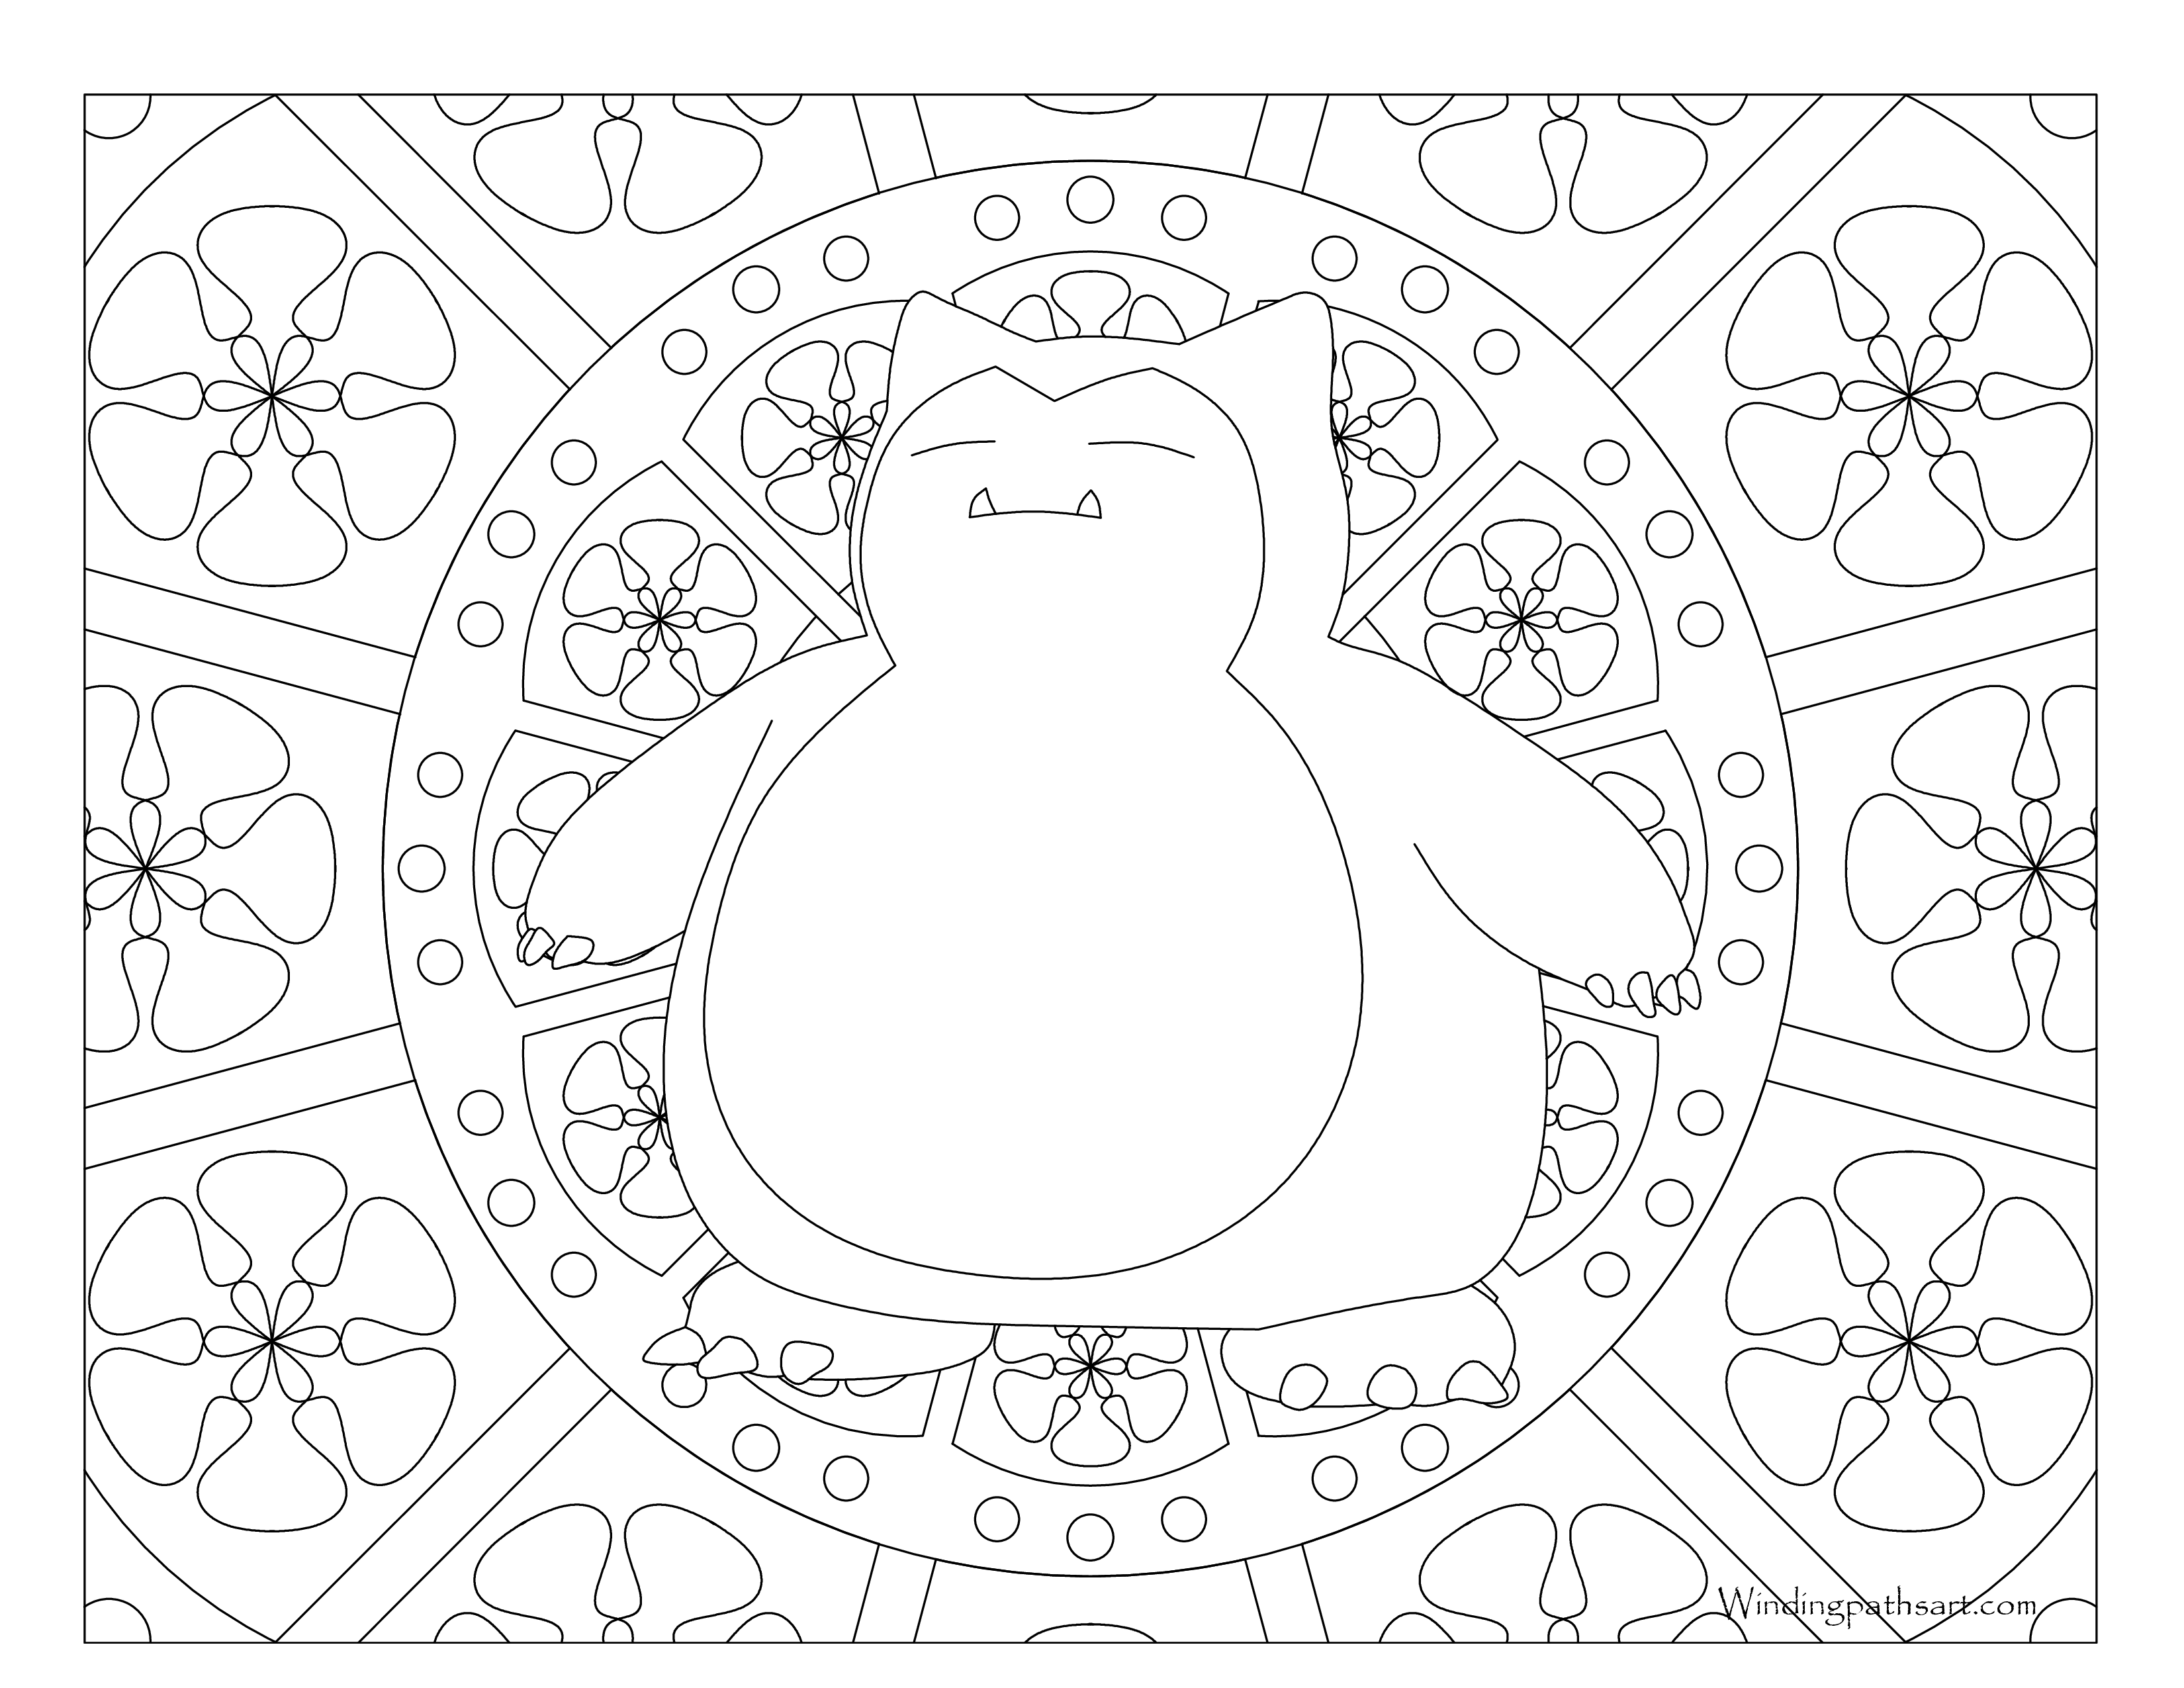 pikachu clipart colouring page